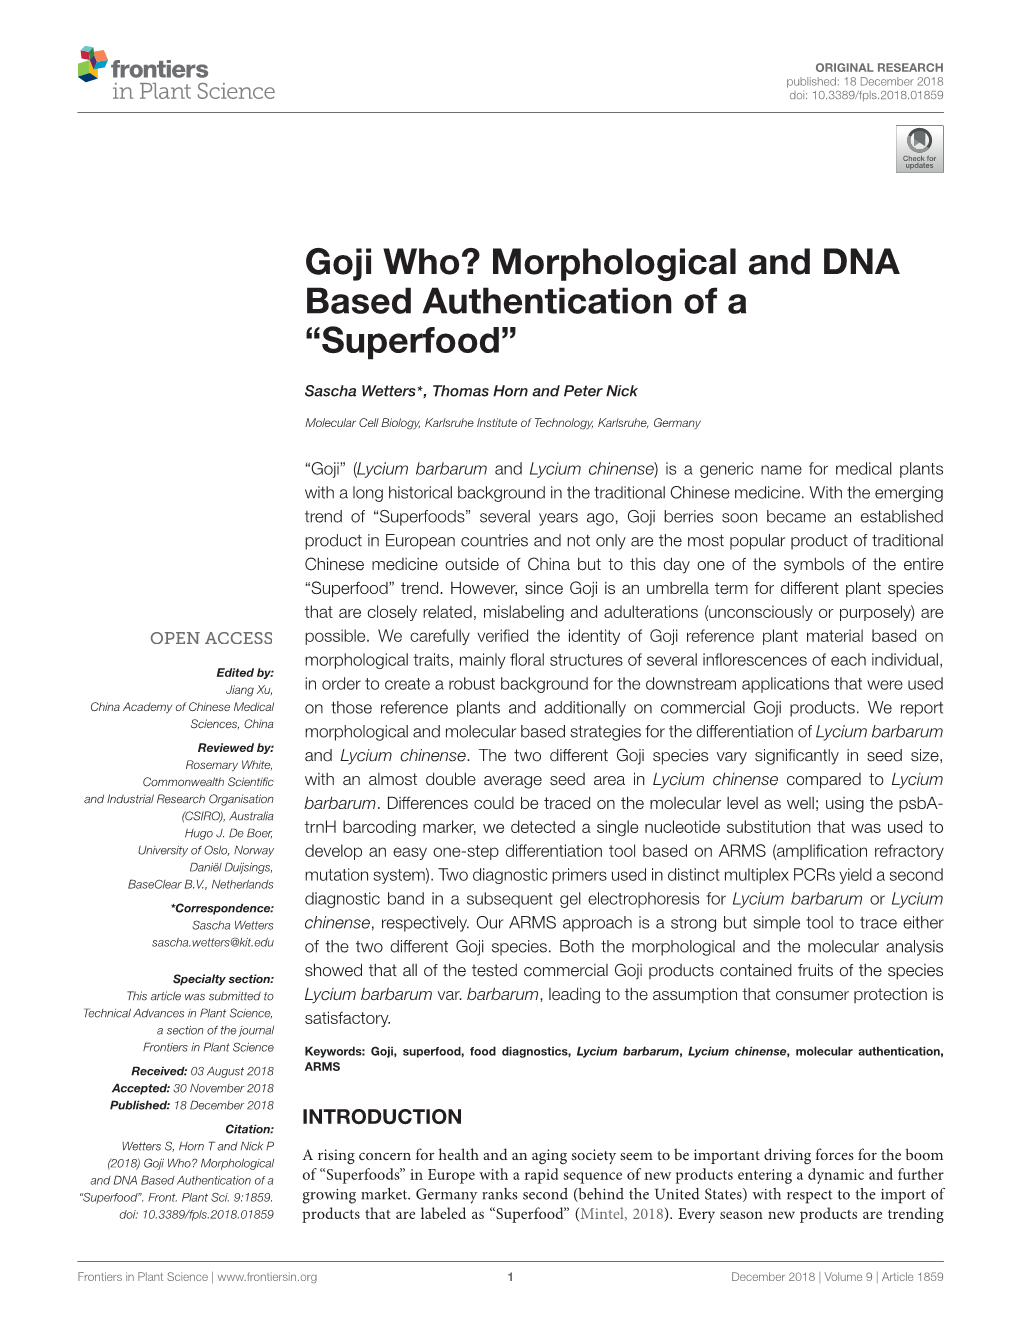 Goji Who? Morphological and DNA Based Authentication of a “Superfood”